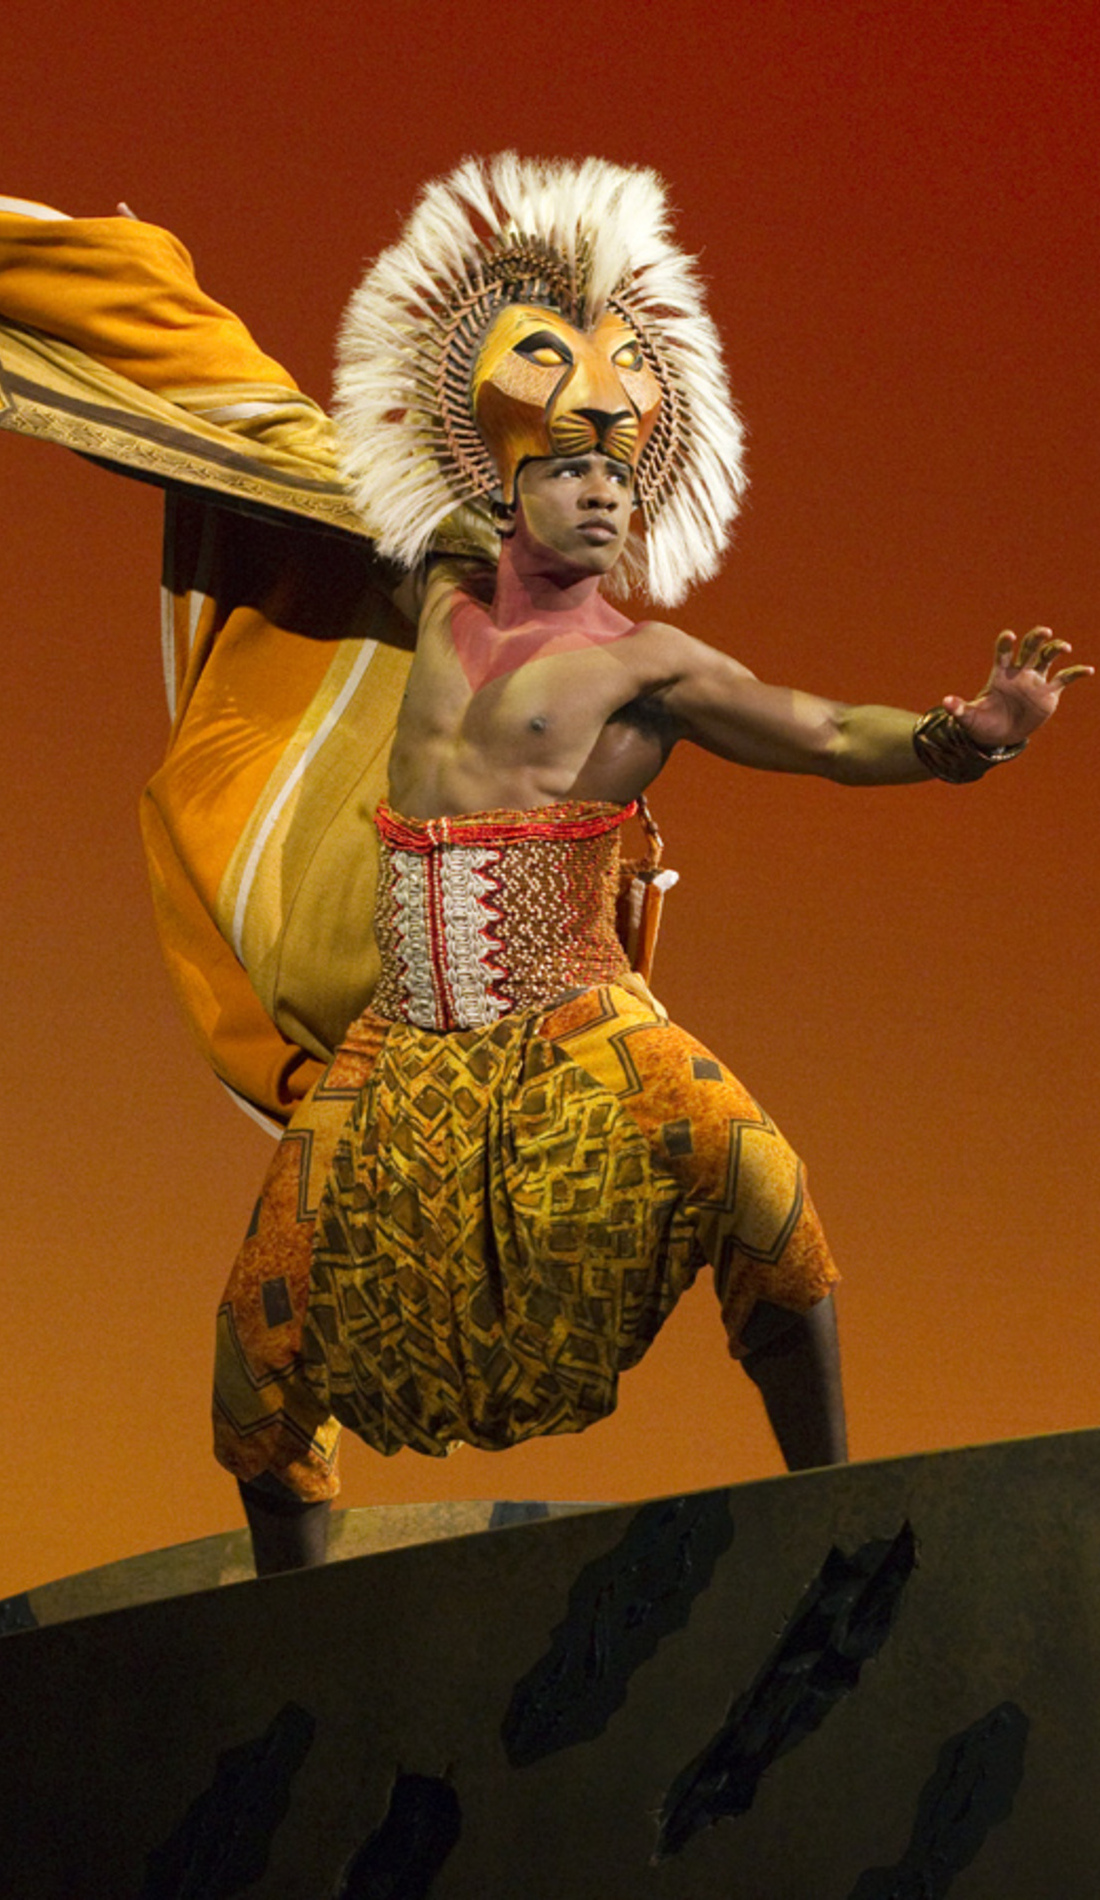 download the kennedy center lion king